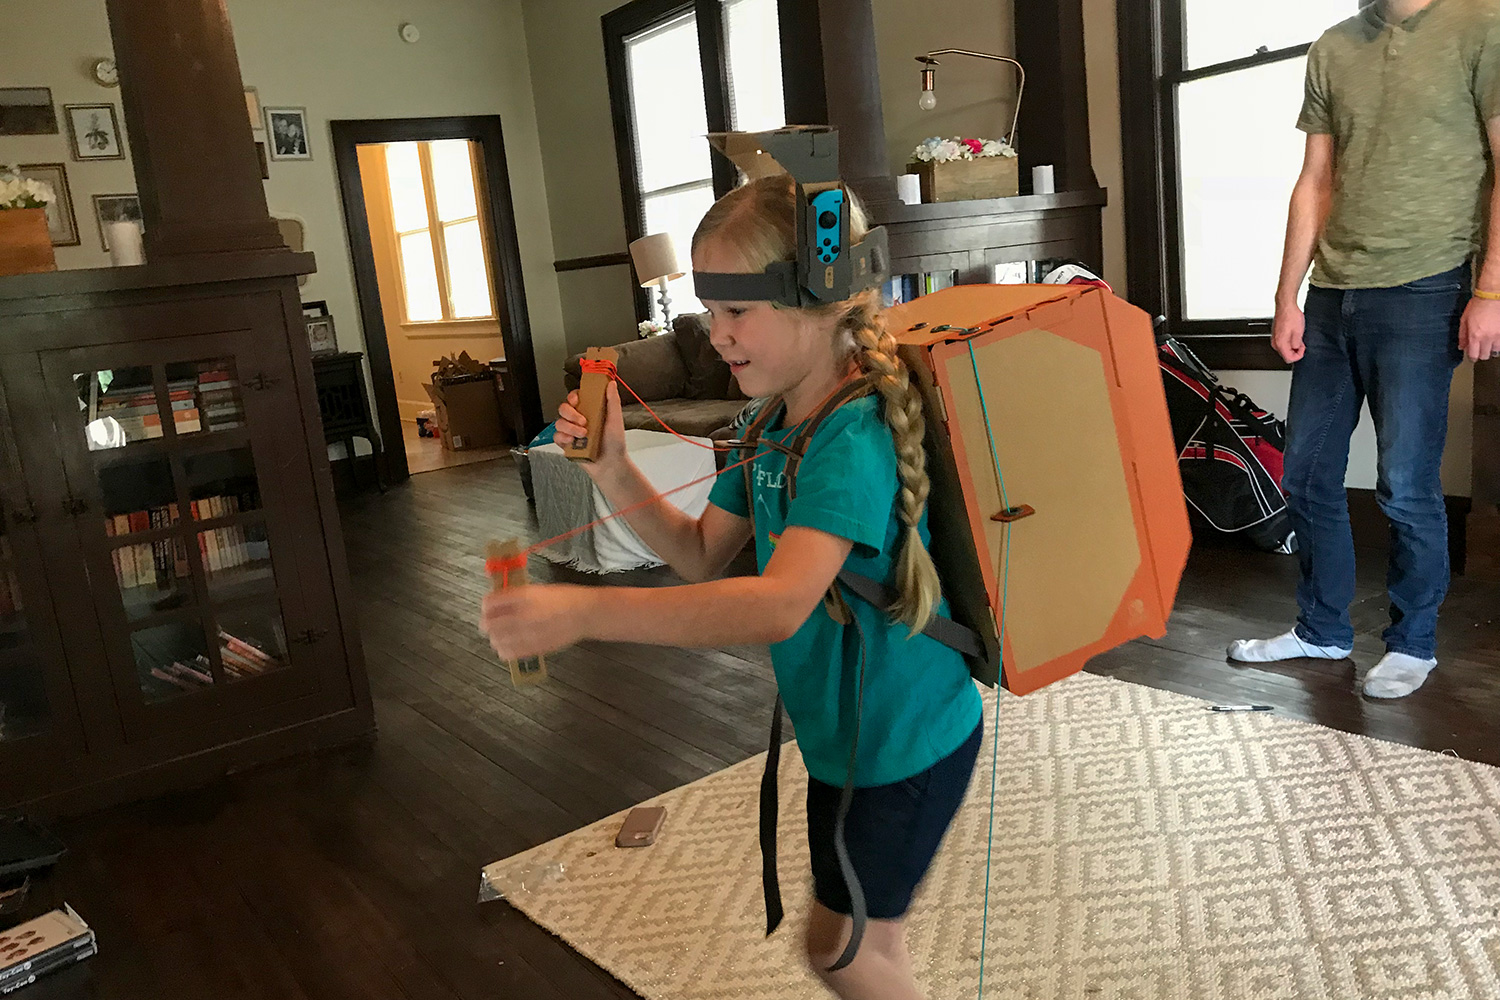 nintendo labo robot kit product experience review kid backpack